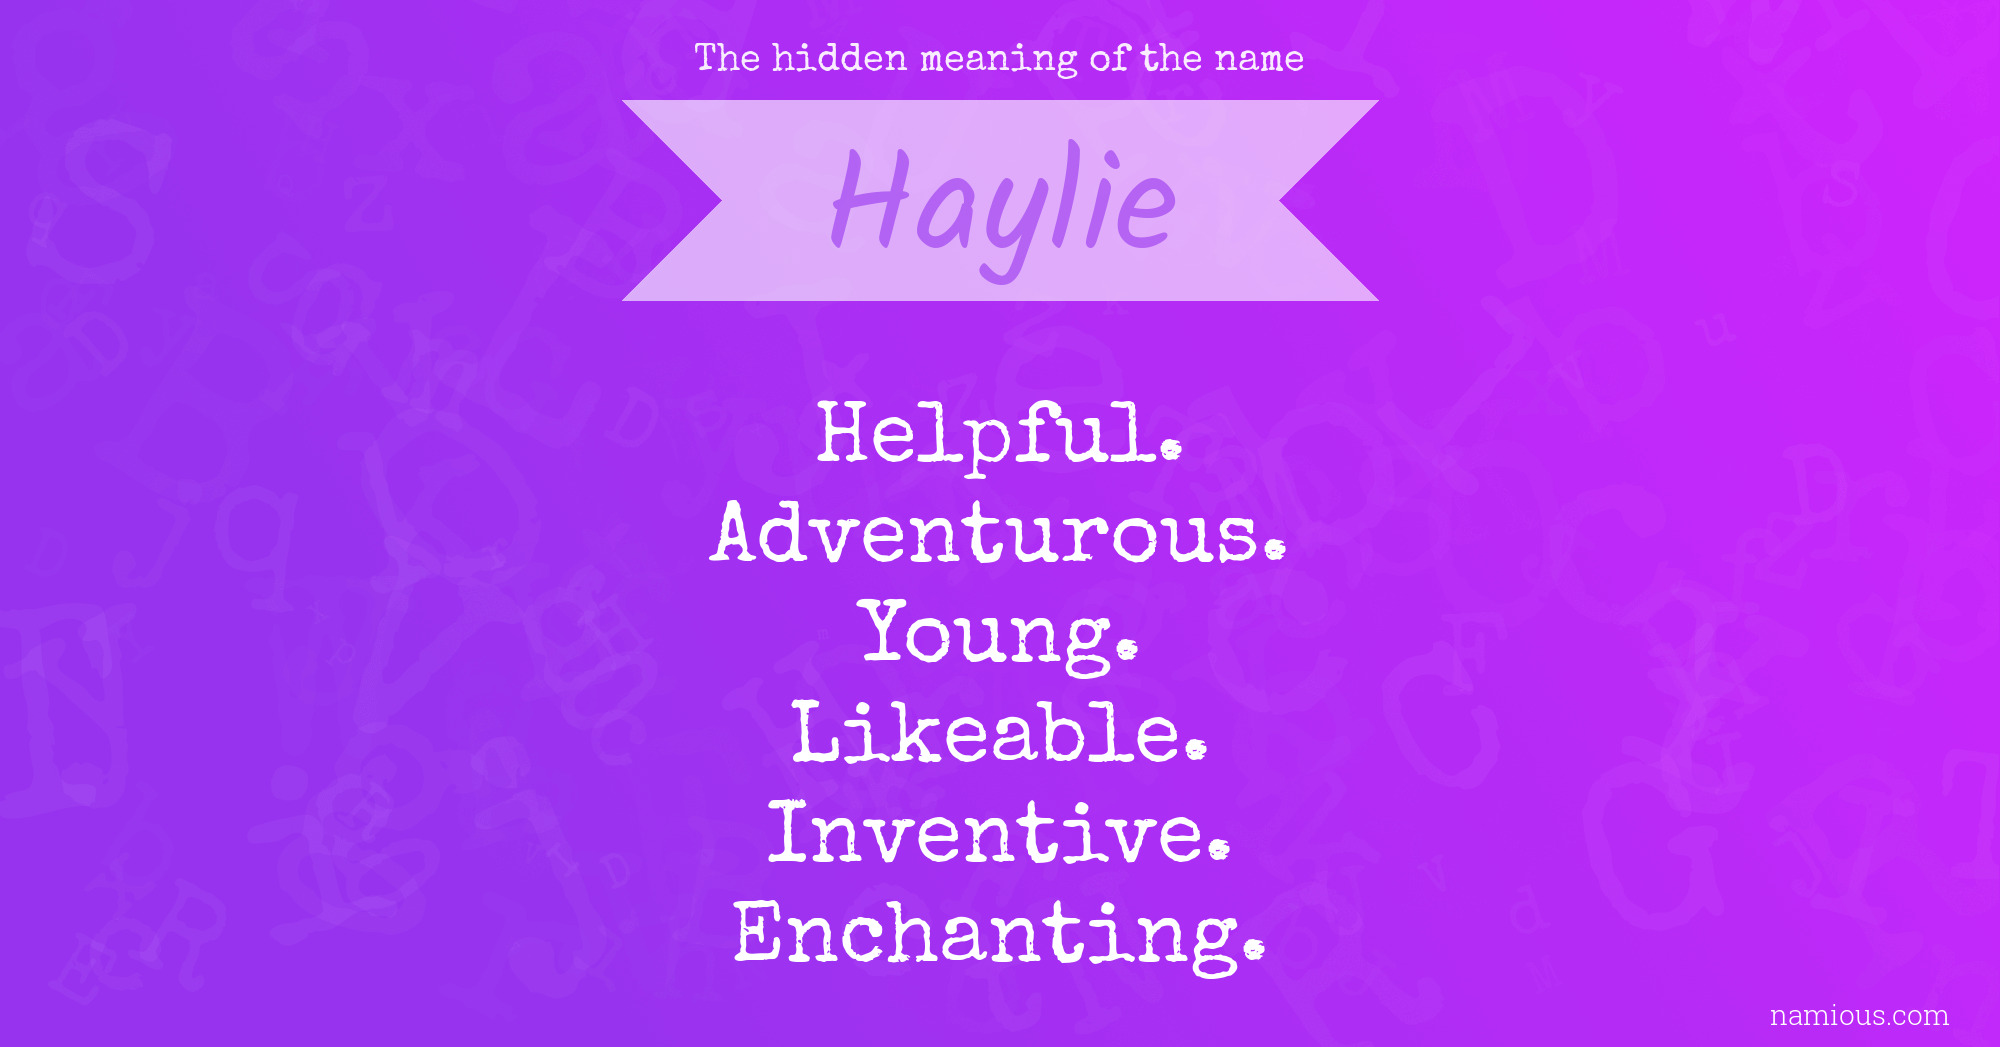 The hidden meaning of the name Haylie